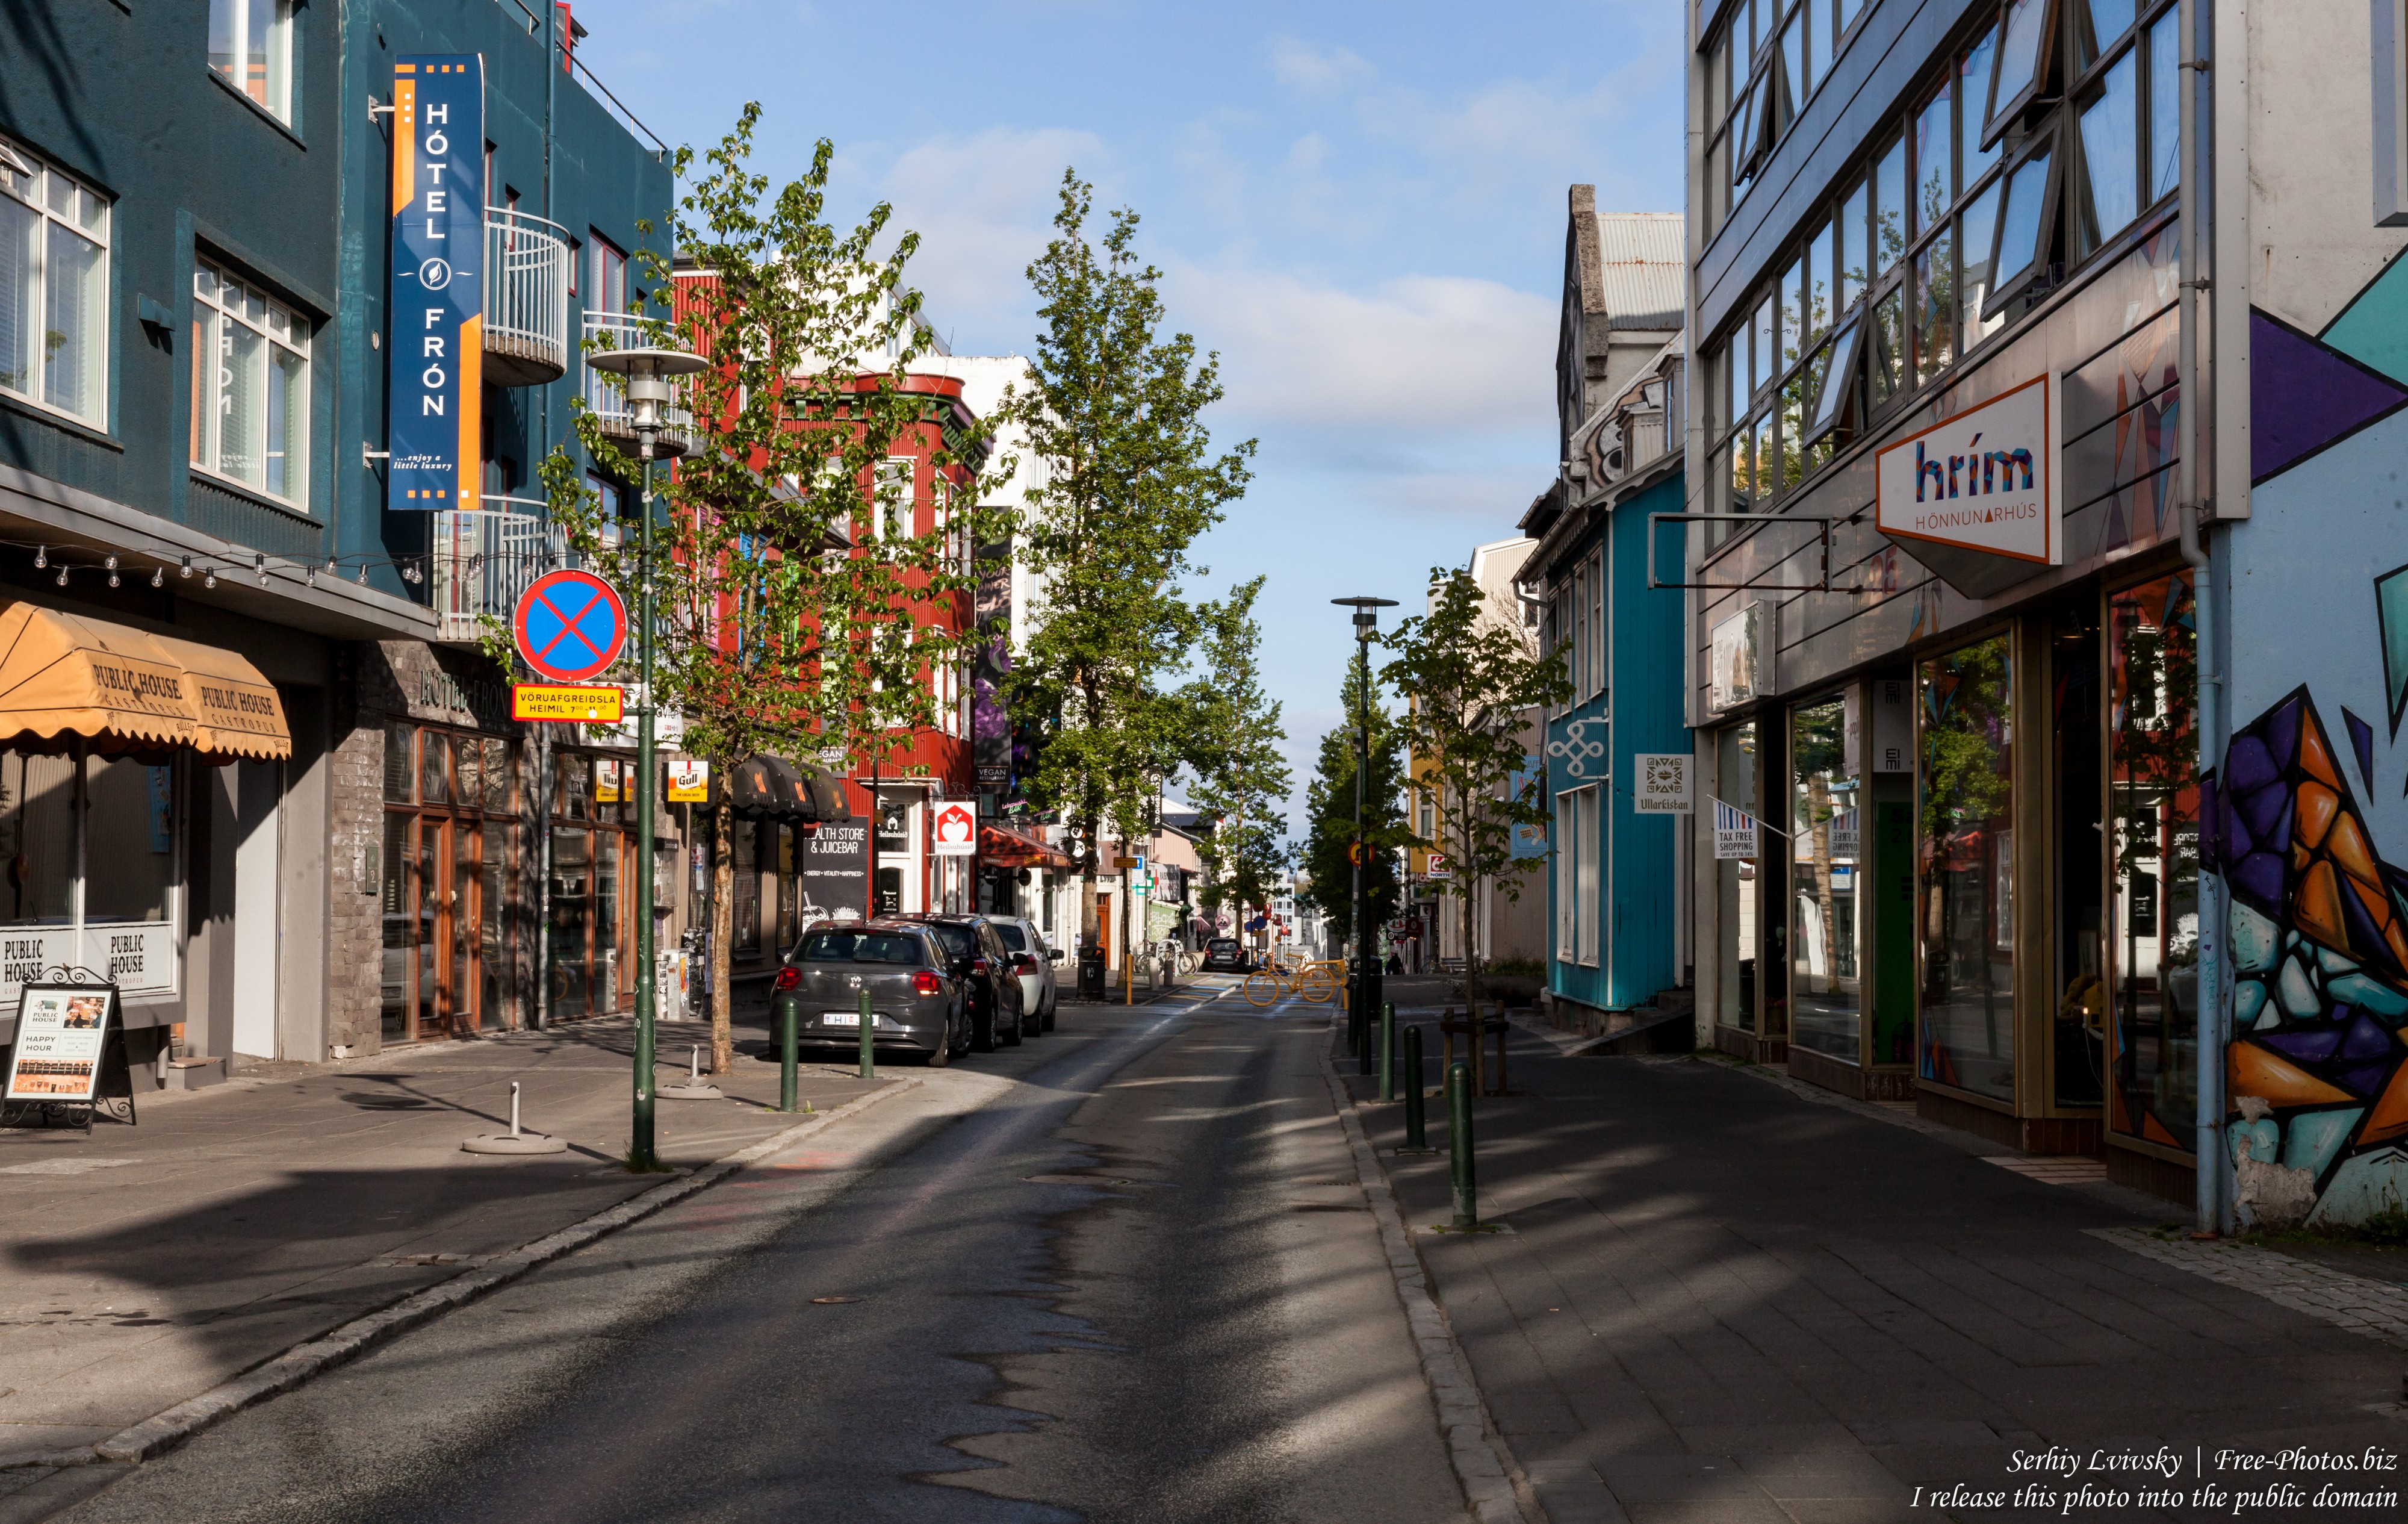 Reykjavik, Iceland, photographed in May 2019 by Serhiy Lvivsky, picture 19